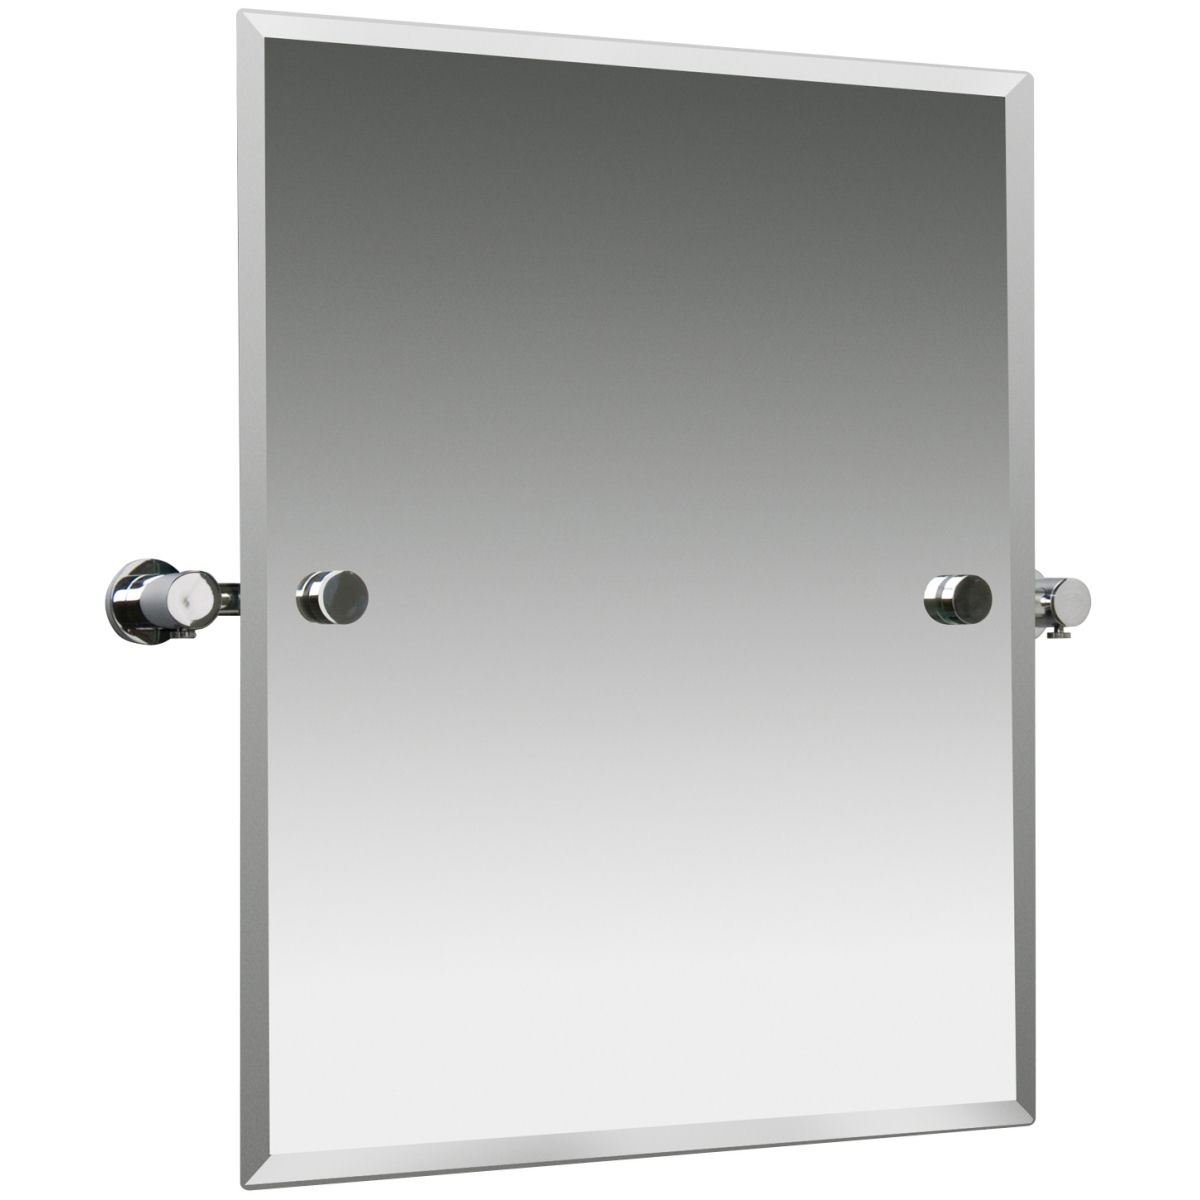 Does the Miller Montana Bathroom Mirror brass-covered chrome and on the fittings?